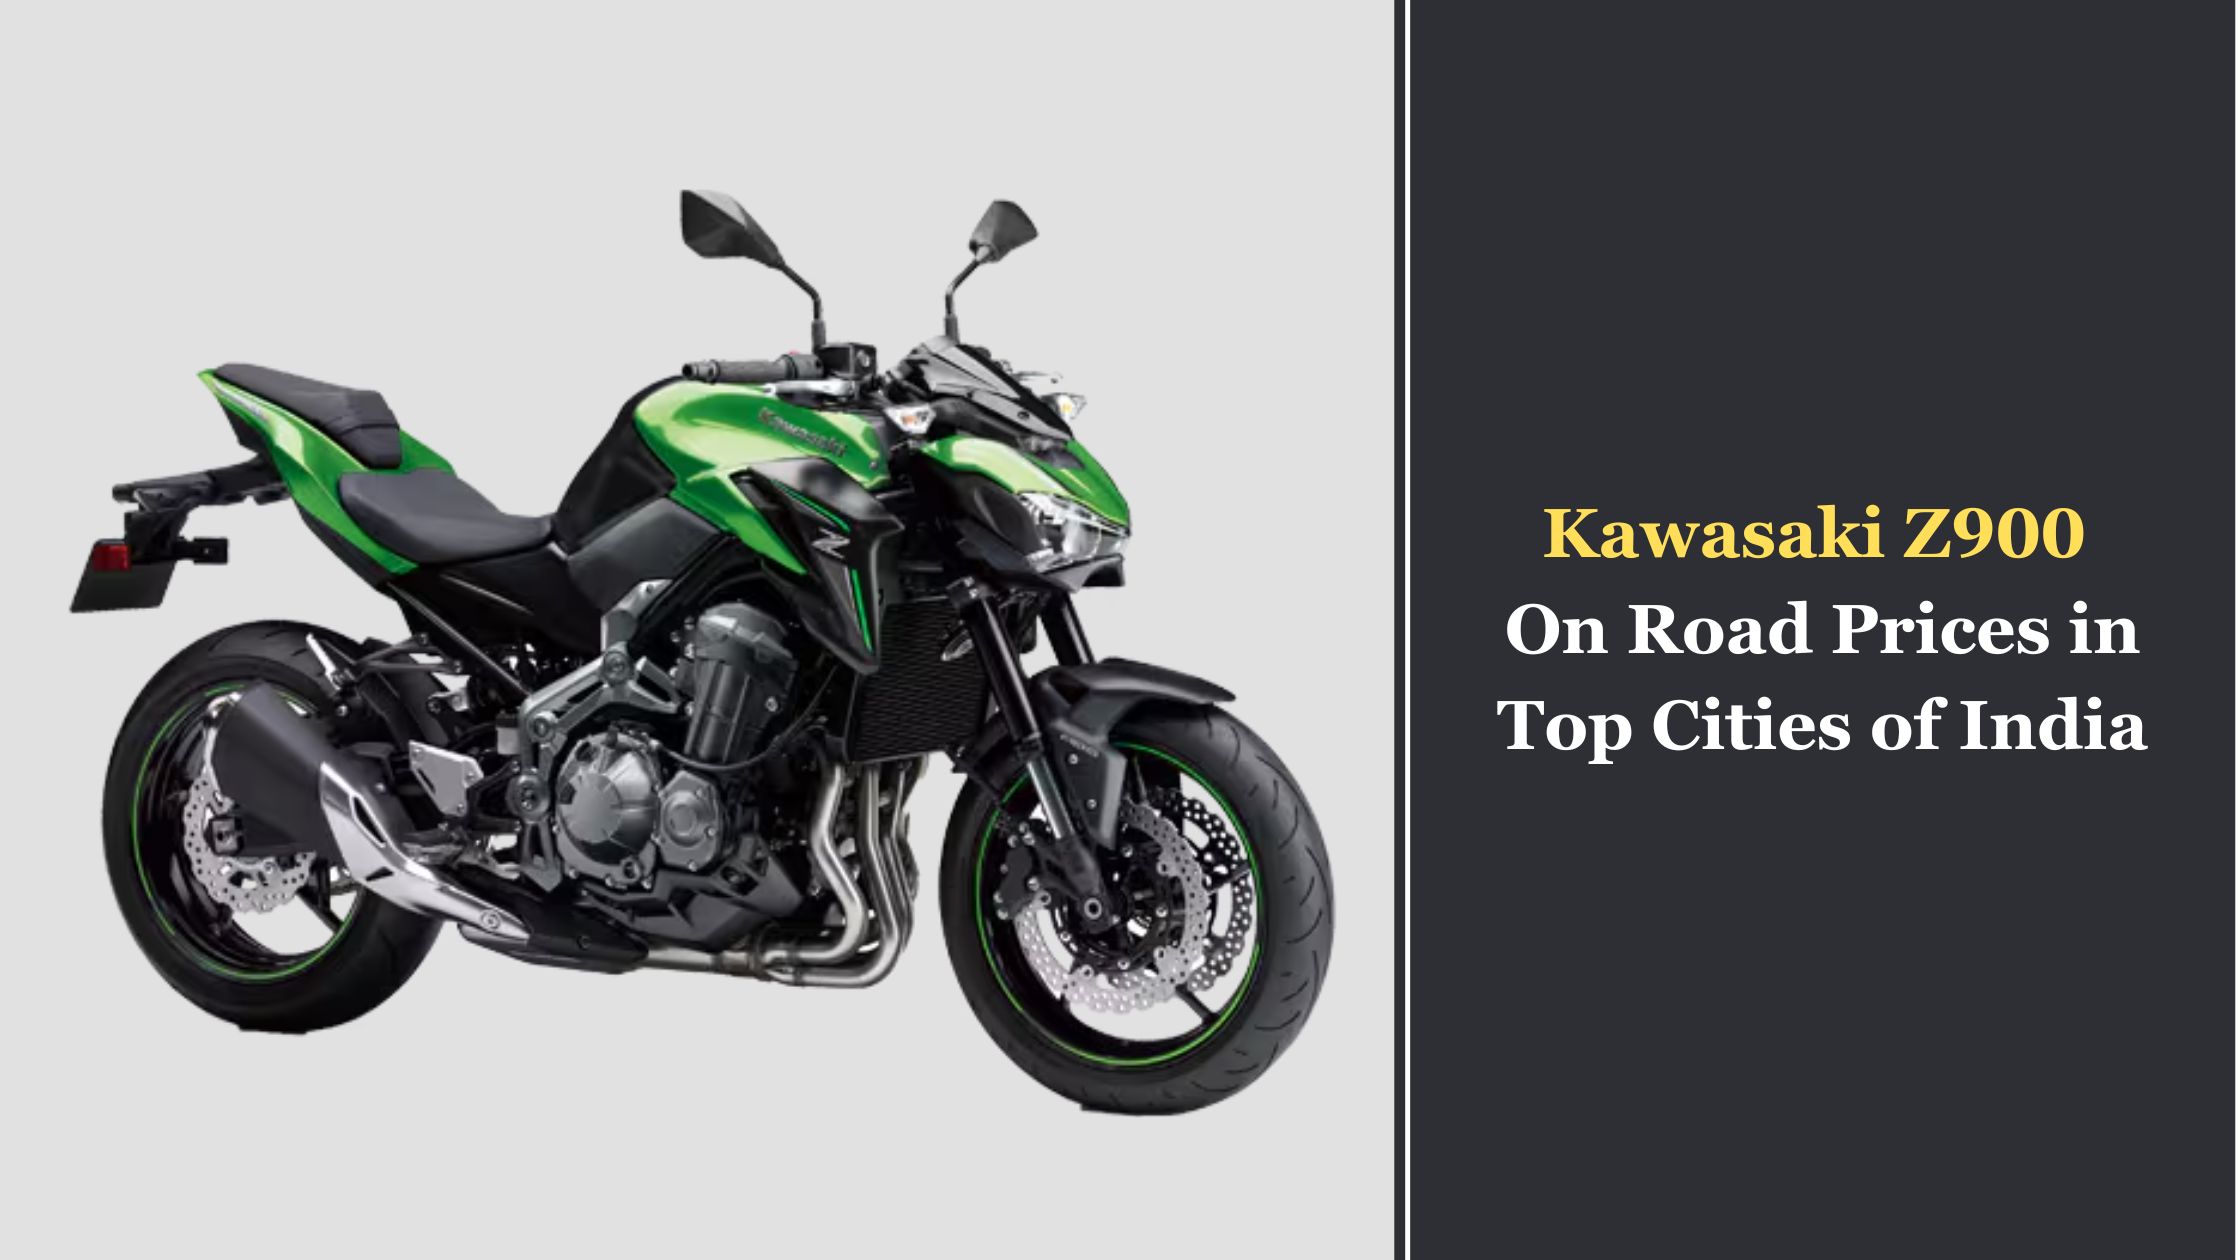 Kawasaki Z900 on Road Prices in Top Cities of India